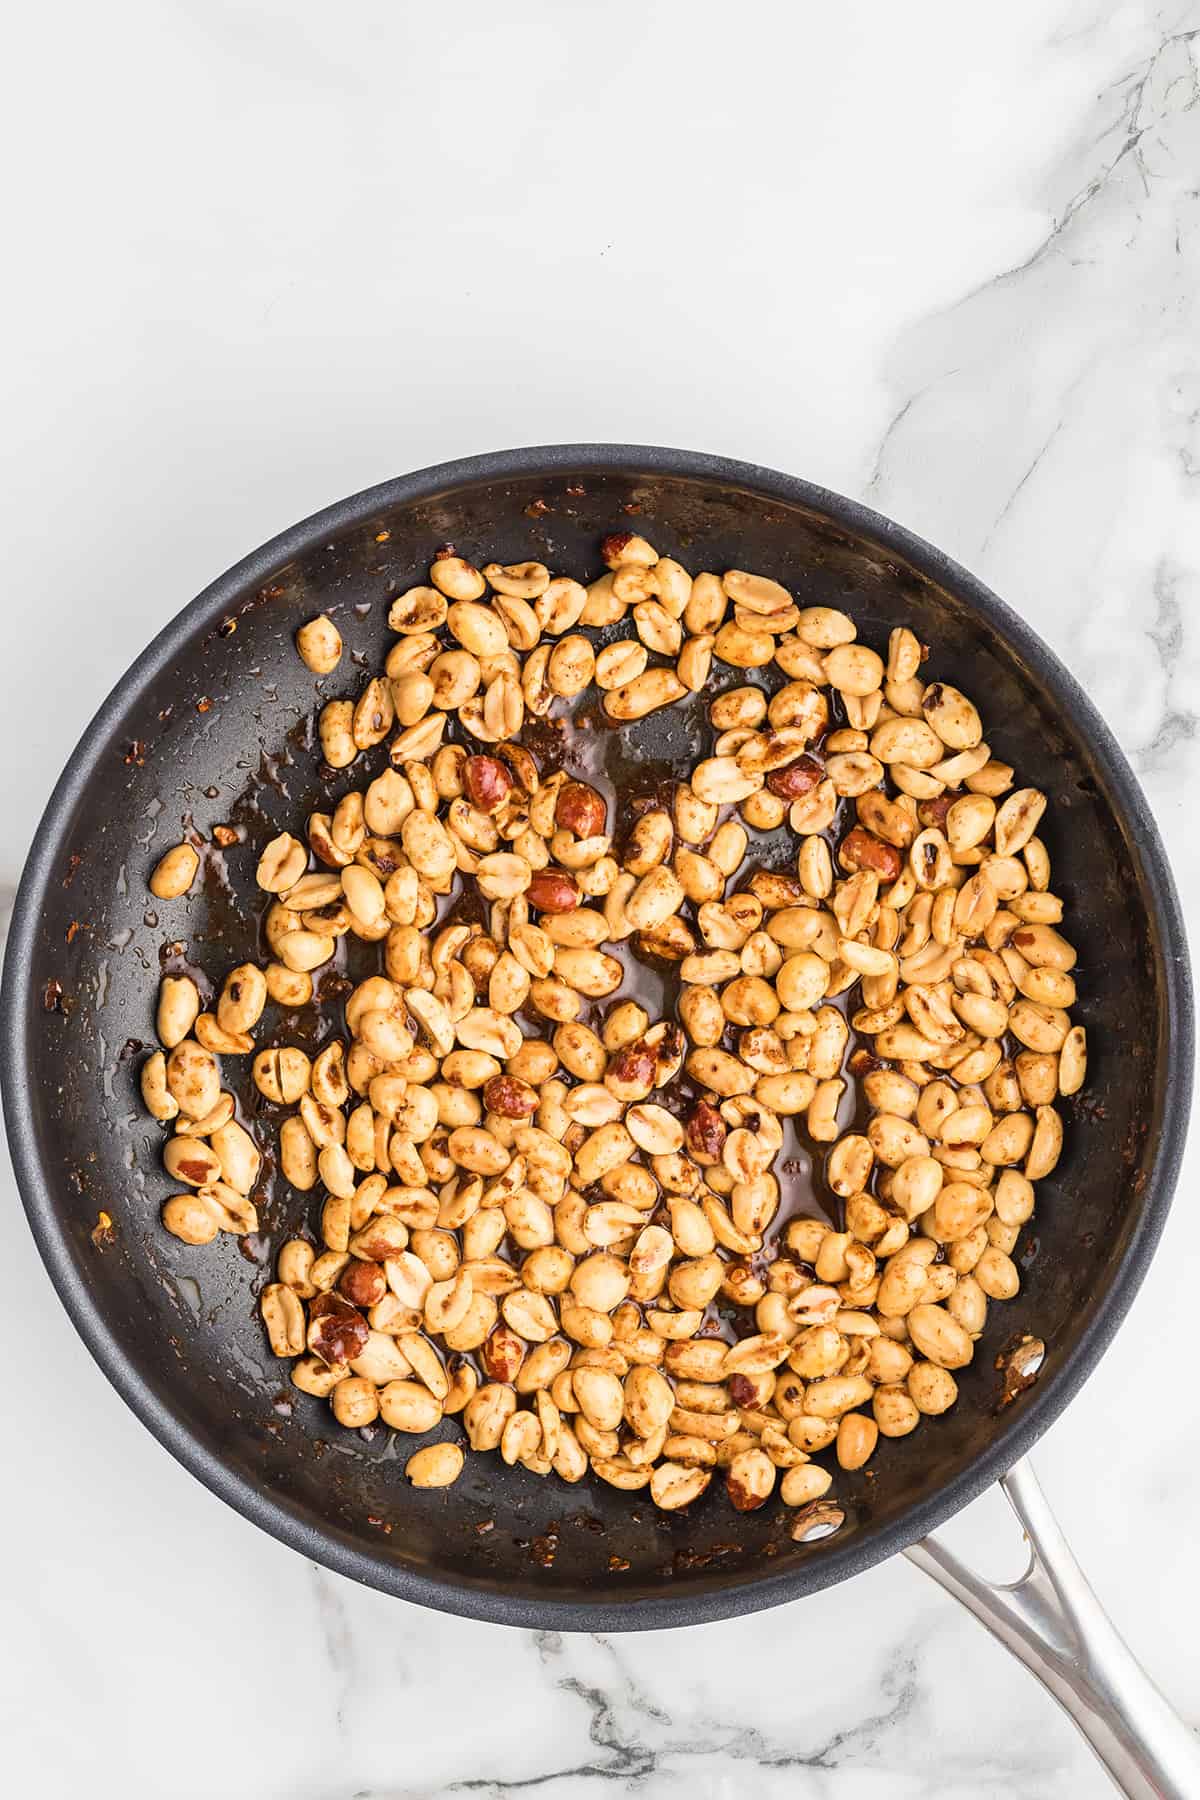 Peanuts and spices cooking in a frying pan.